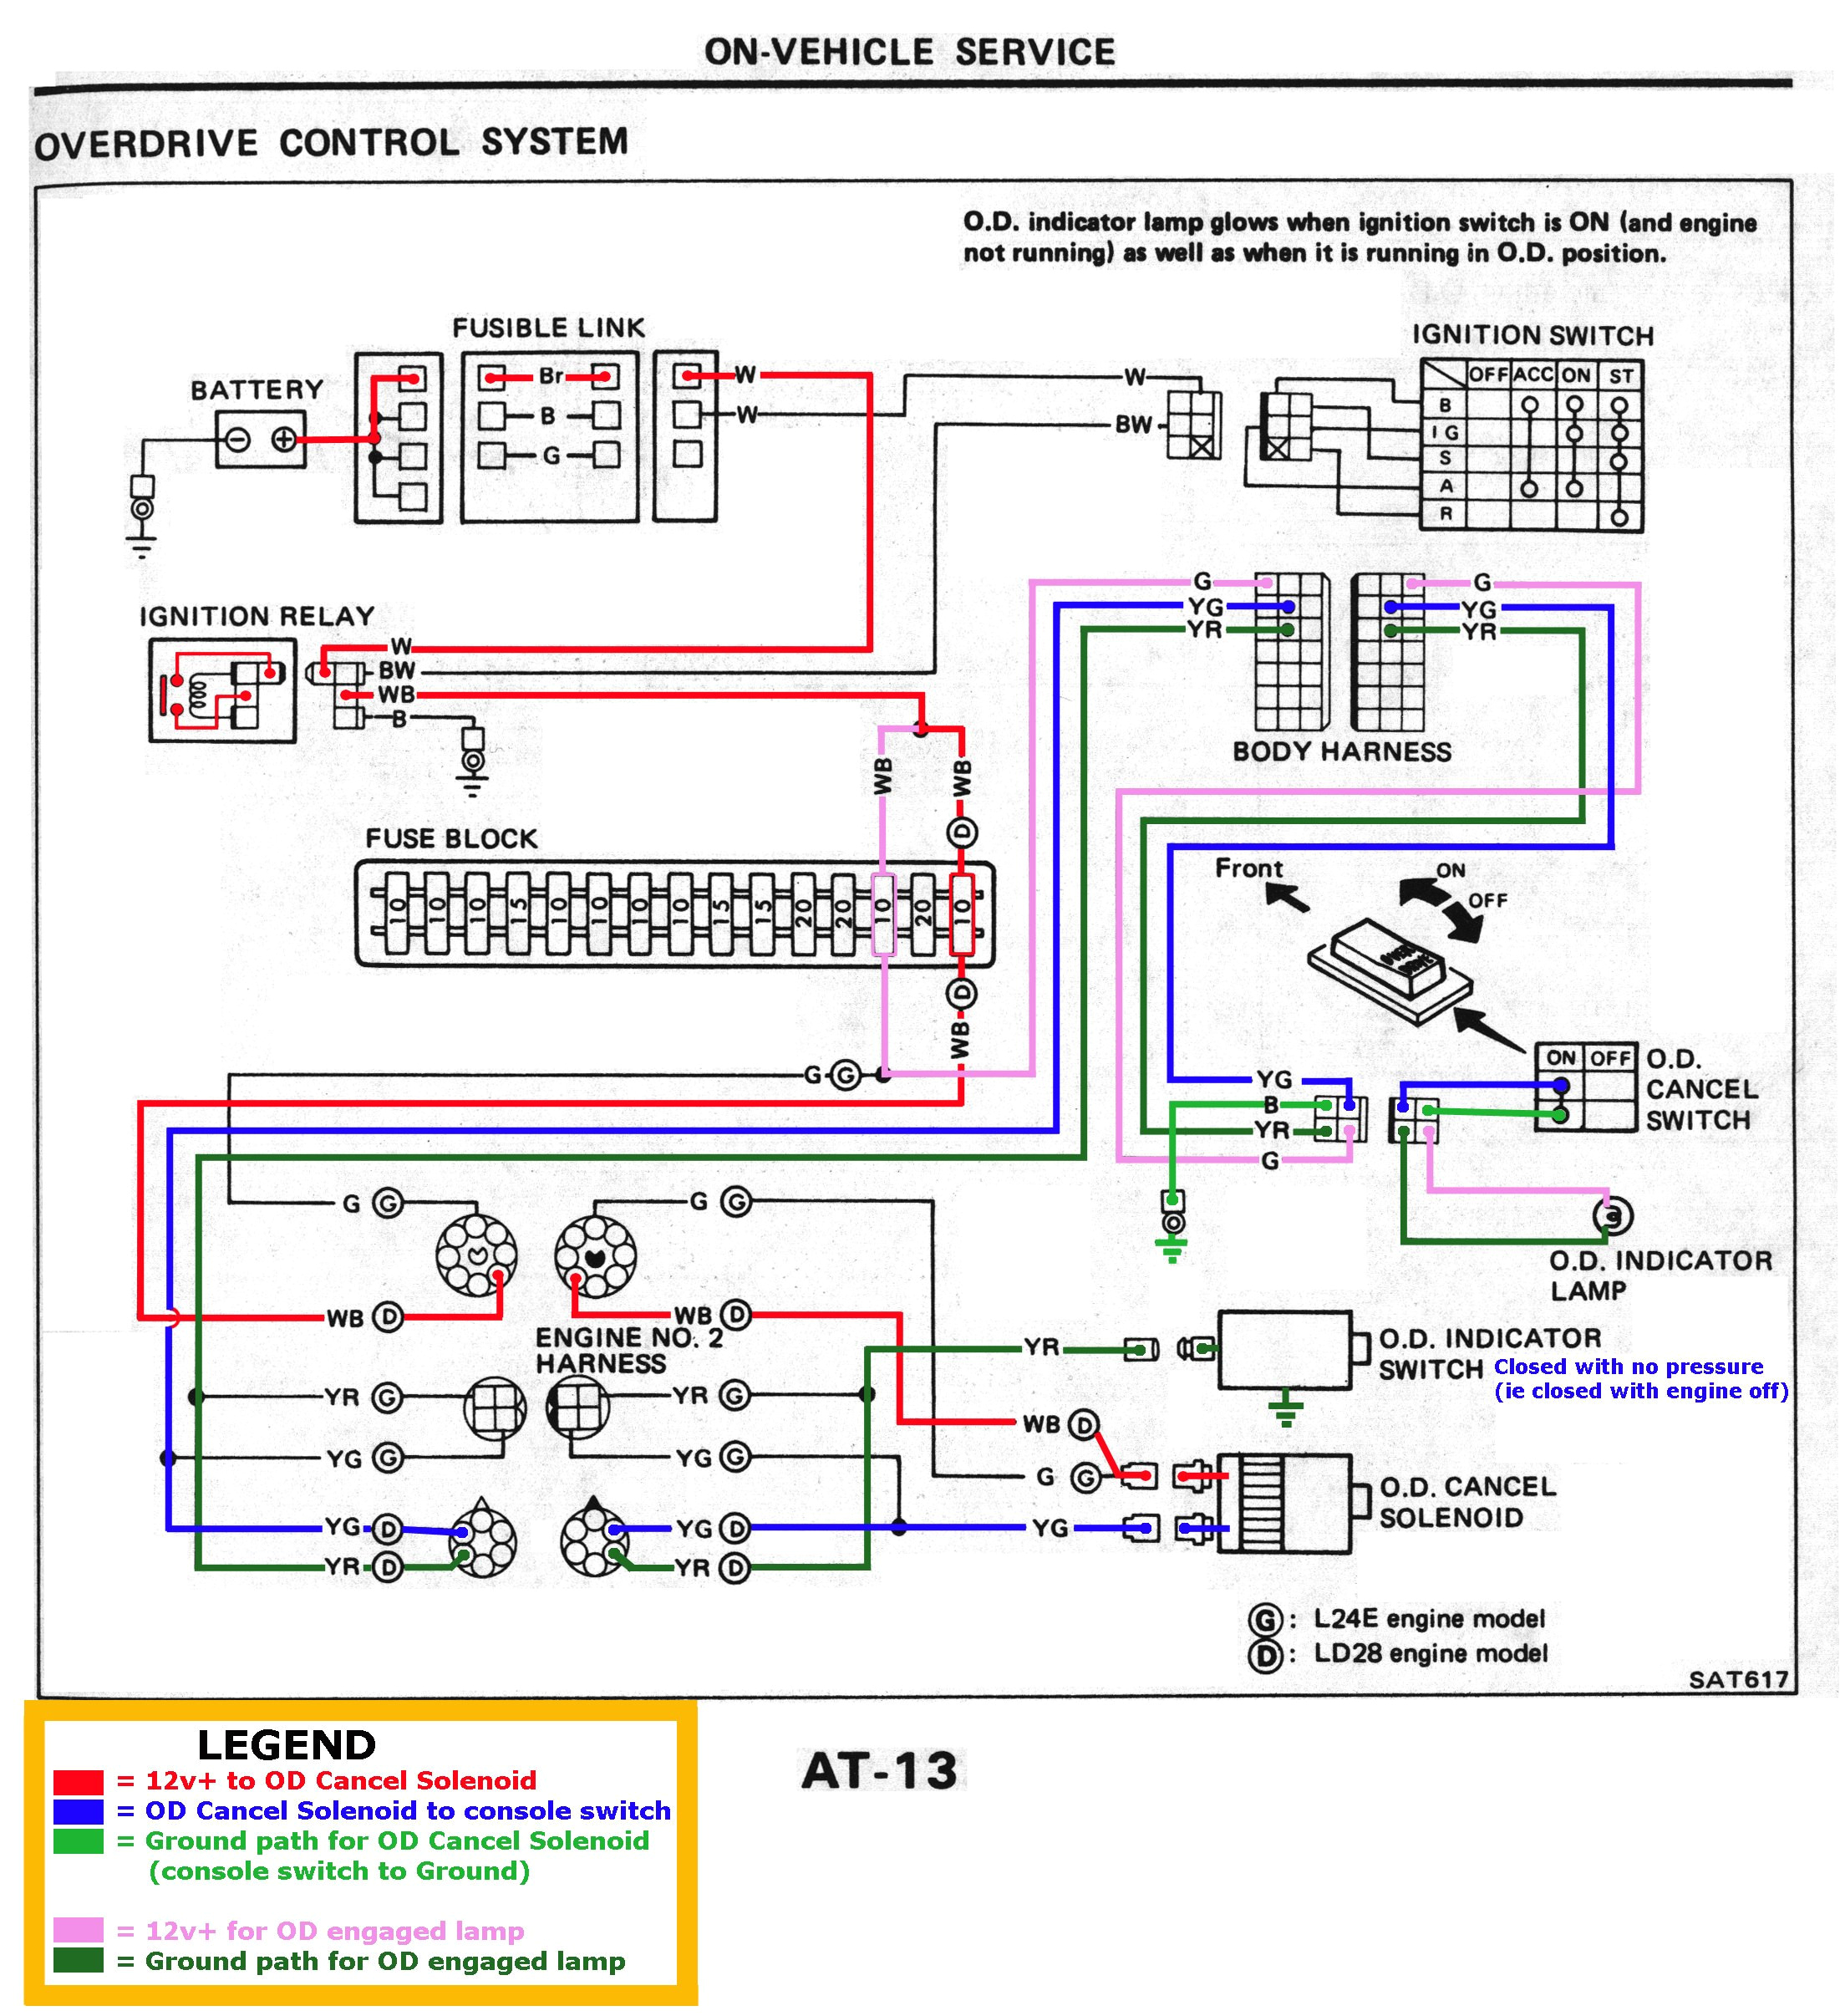 pontiac bonneville fuel pump location get free image about wiring ignition coil location on 1998 nissan